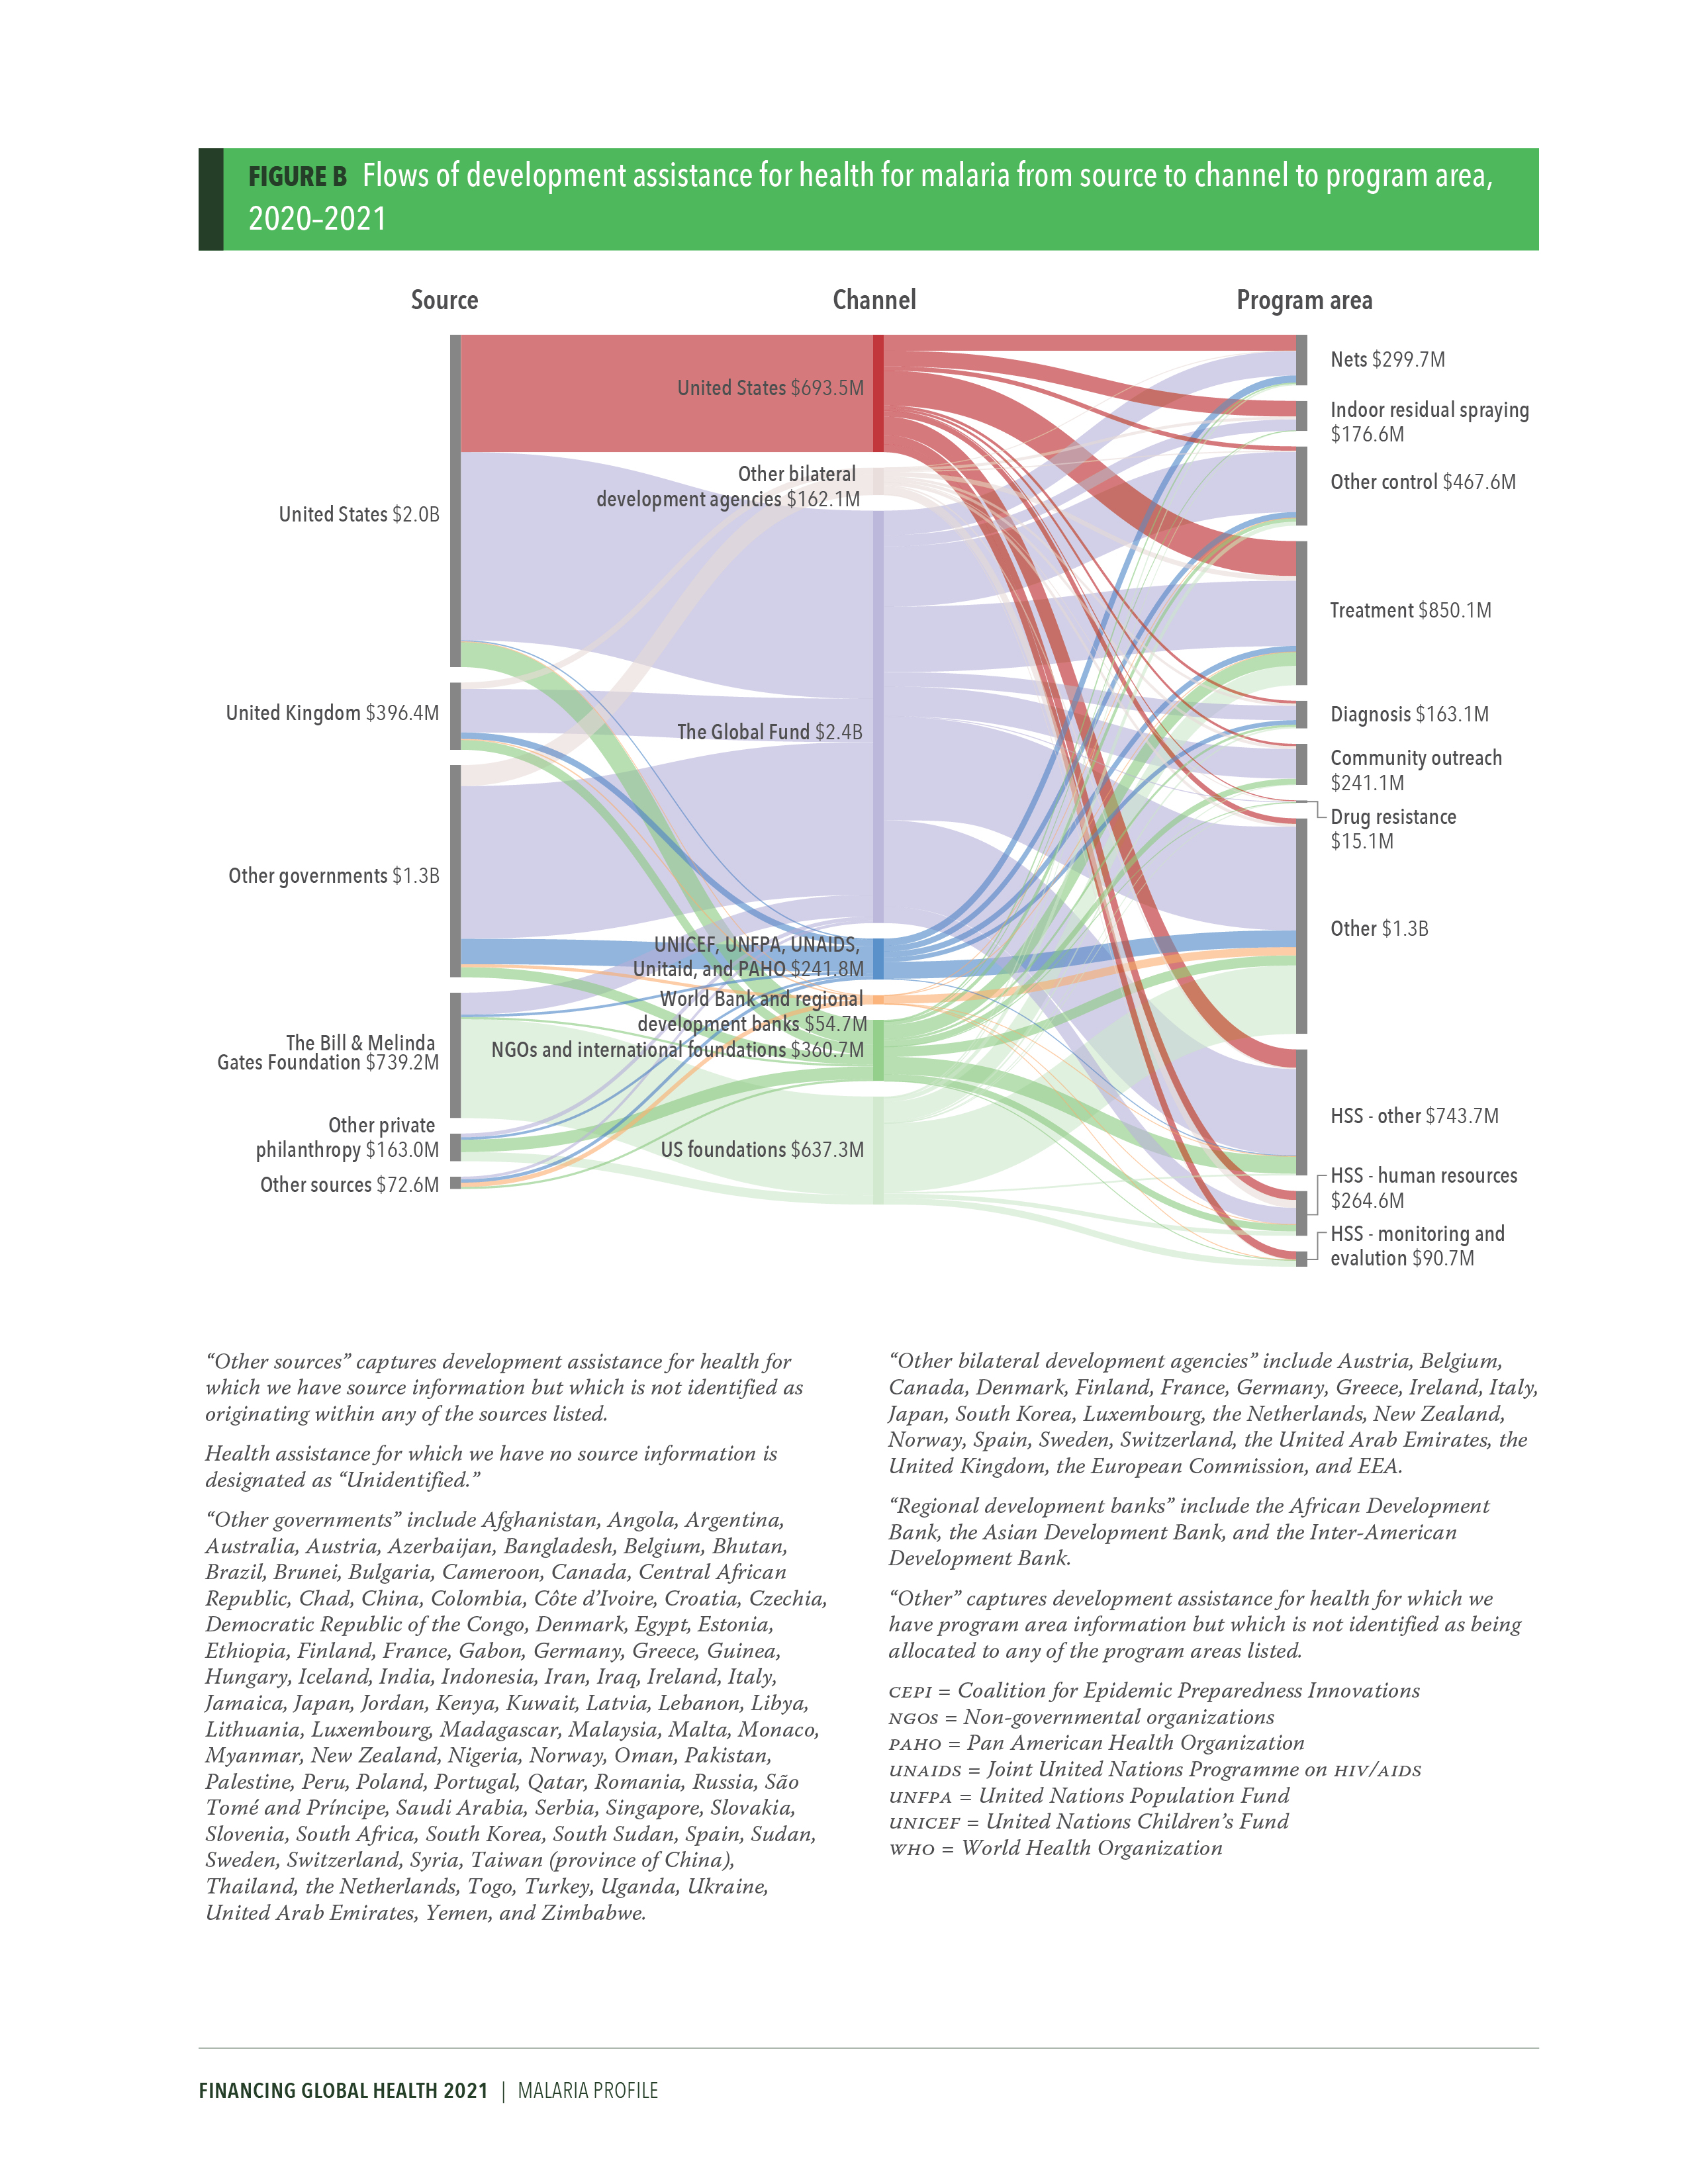 Disease spending profile for malaria: page 2 shows a diagram of flows of development assistance for health from source to channel to program area. Download the profile for more details. 